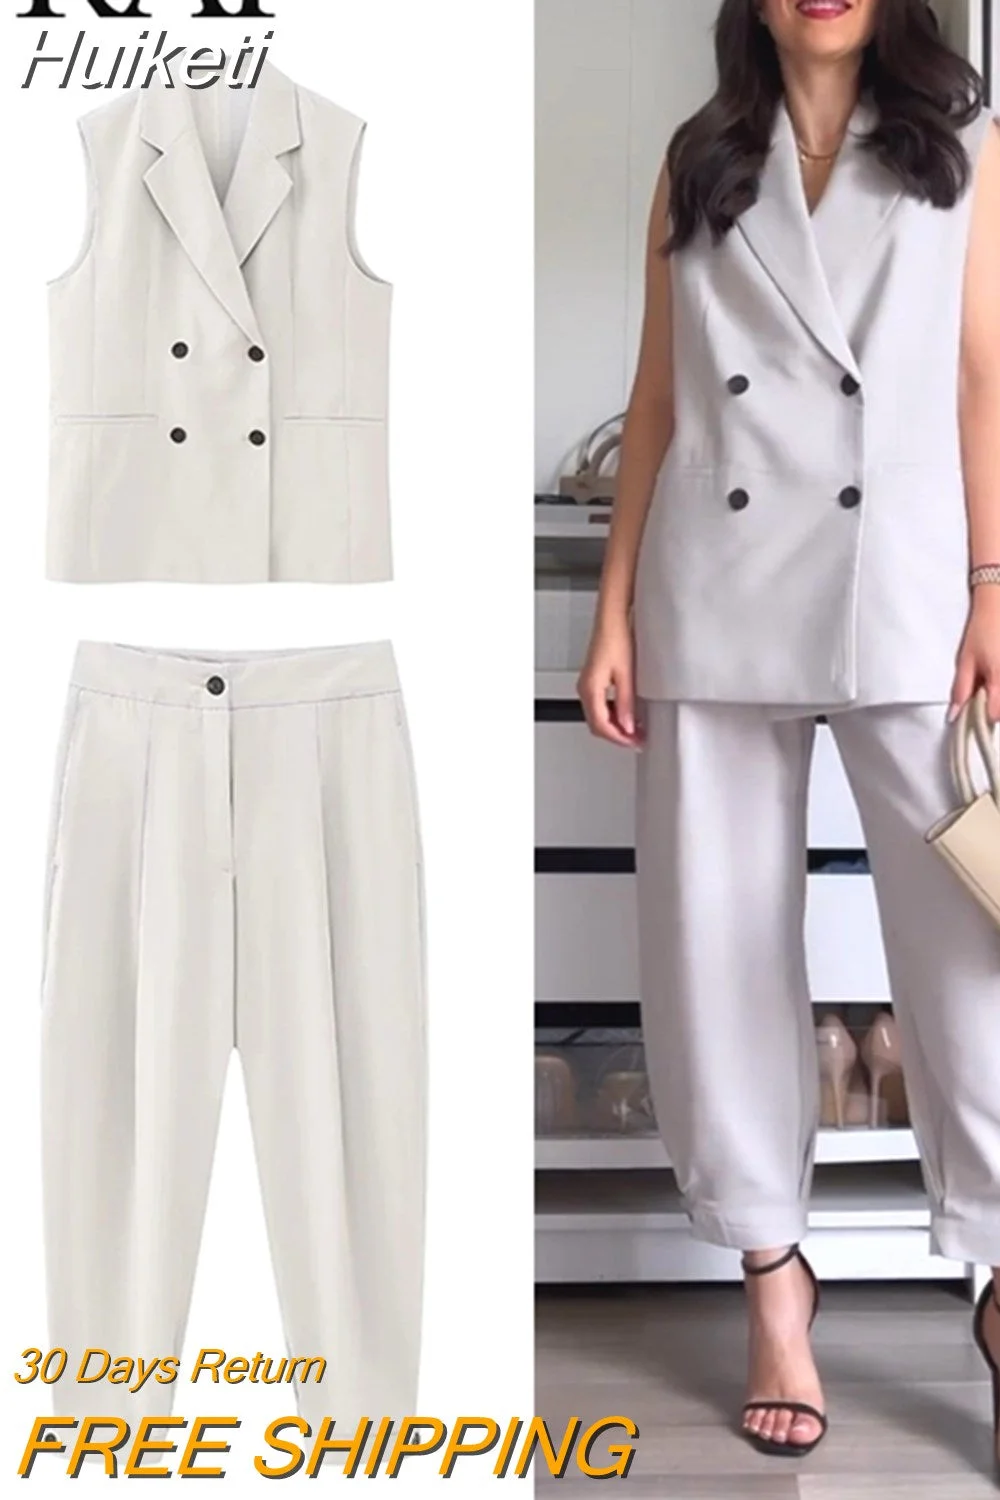 Huiketi Women Fashion Suits 2023 Trend New Back Slit Lapel Tops + With Button Decoration High Waist Office Lady Mujer Long Pants